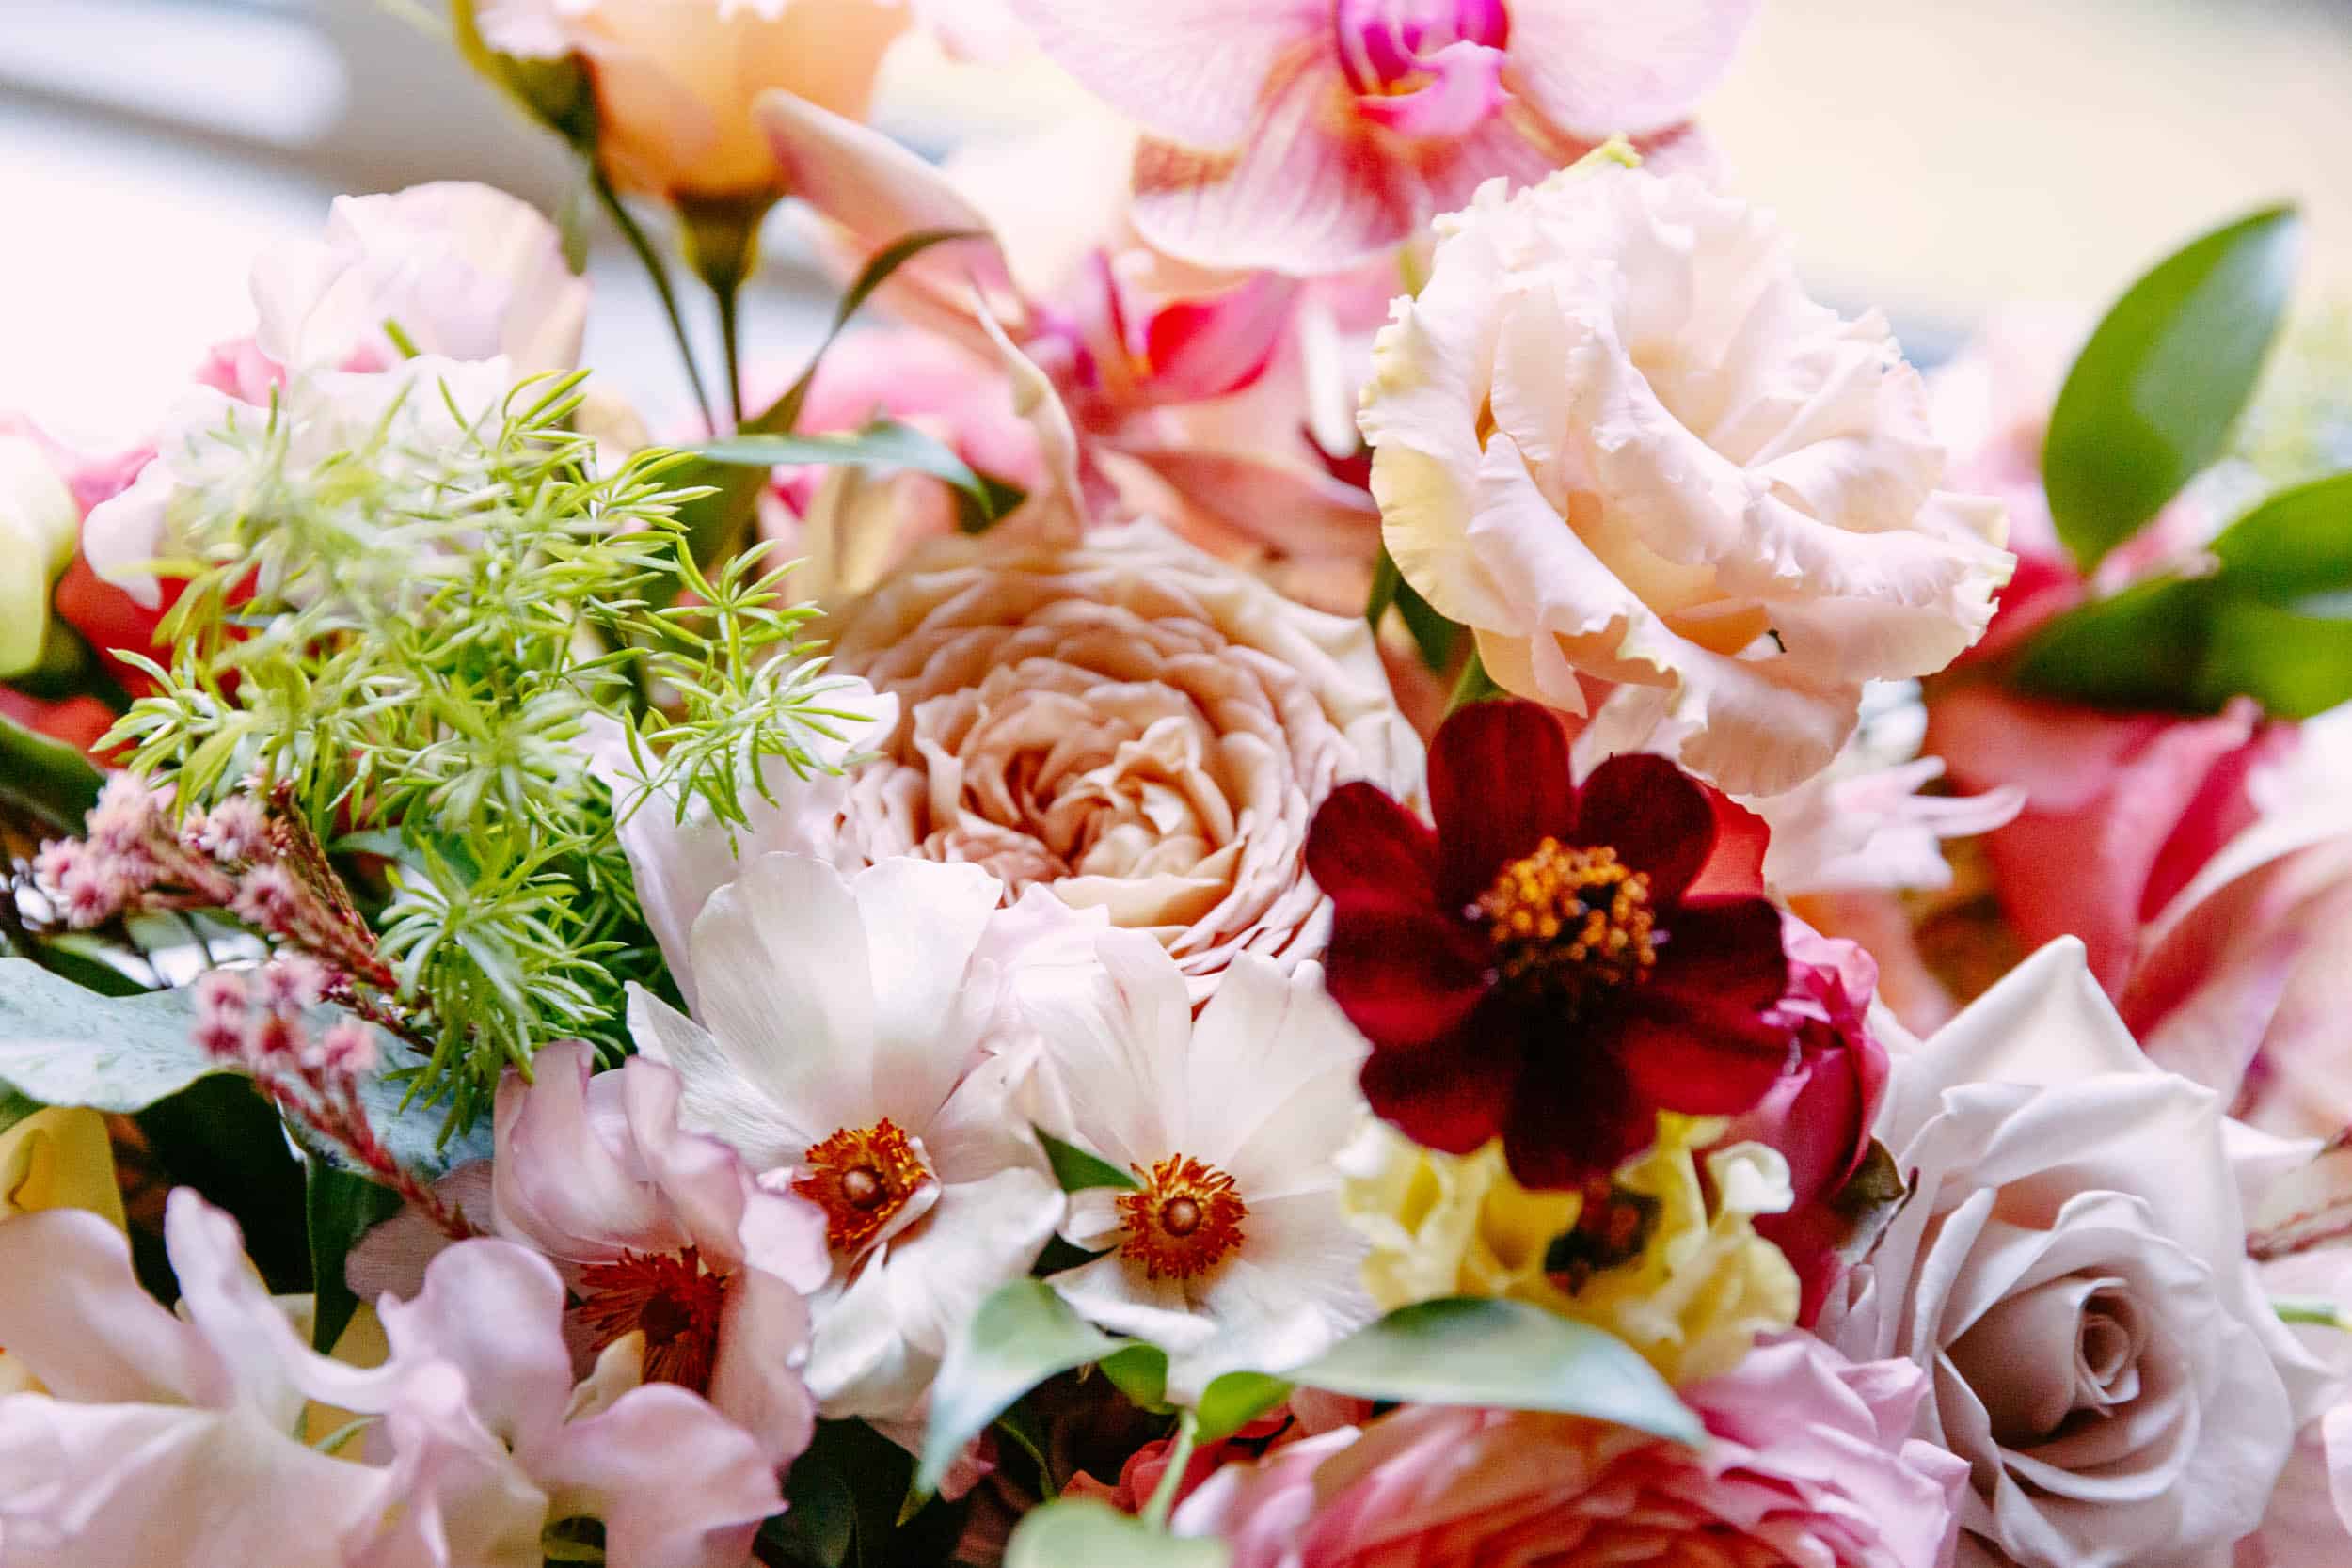 A close-up of a bouquet of flowers.